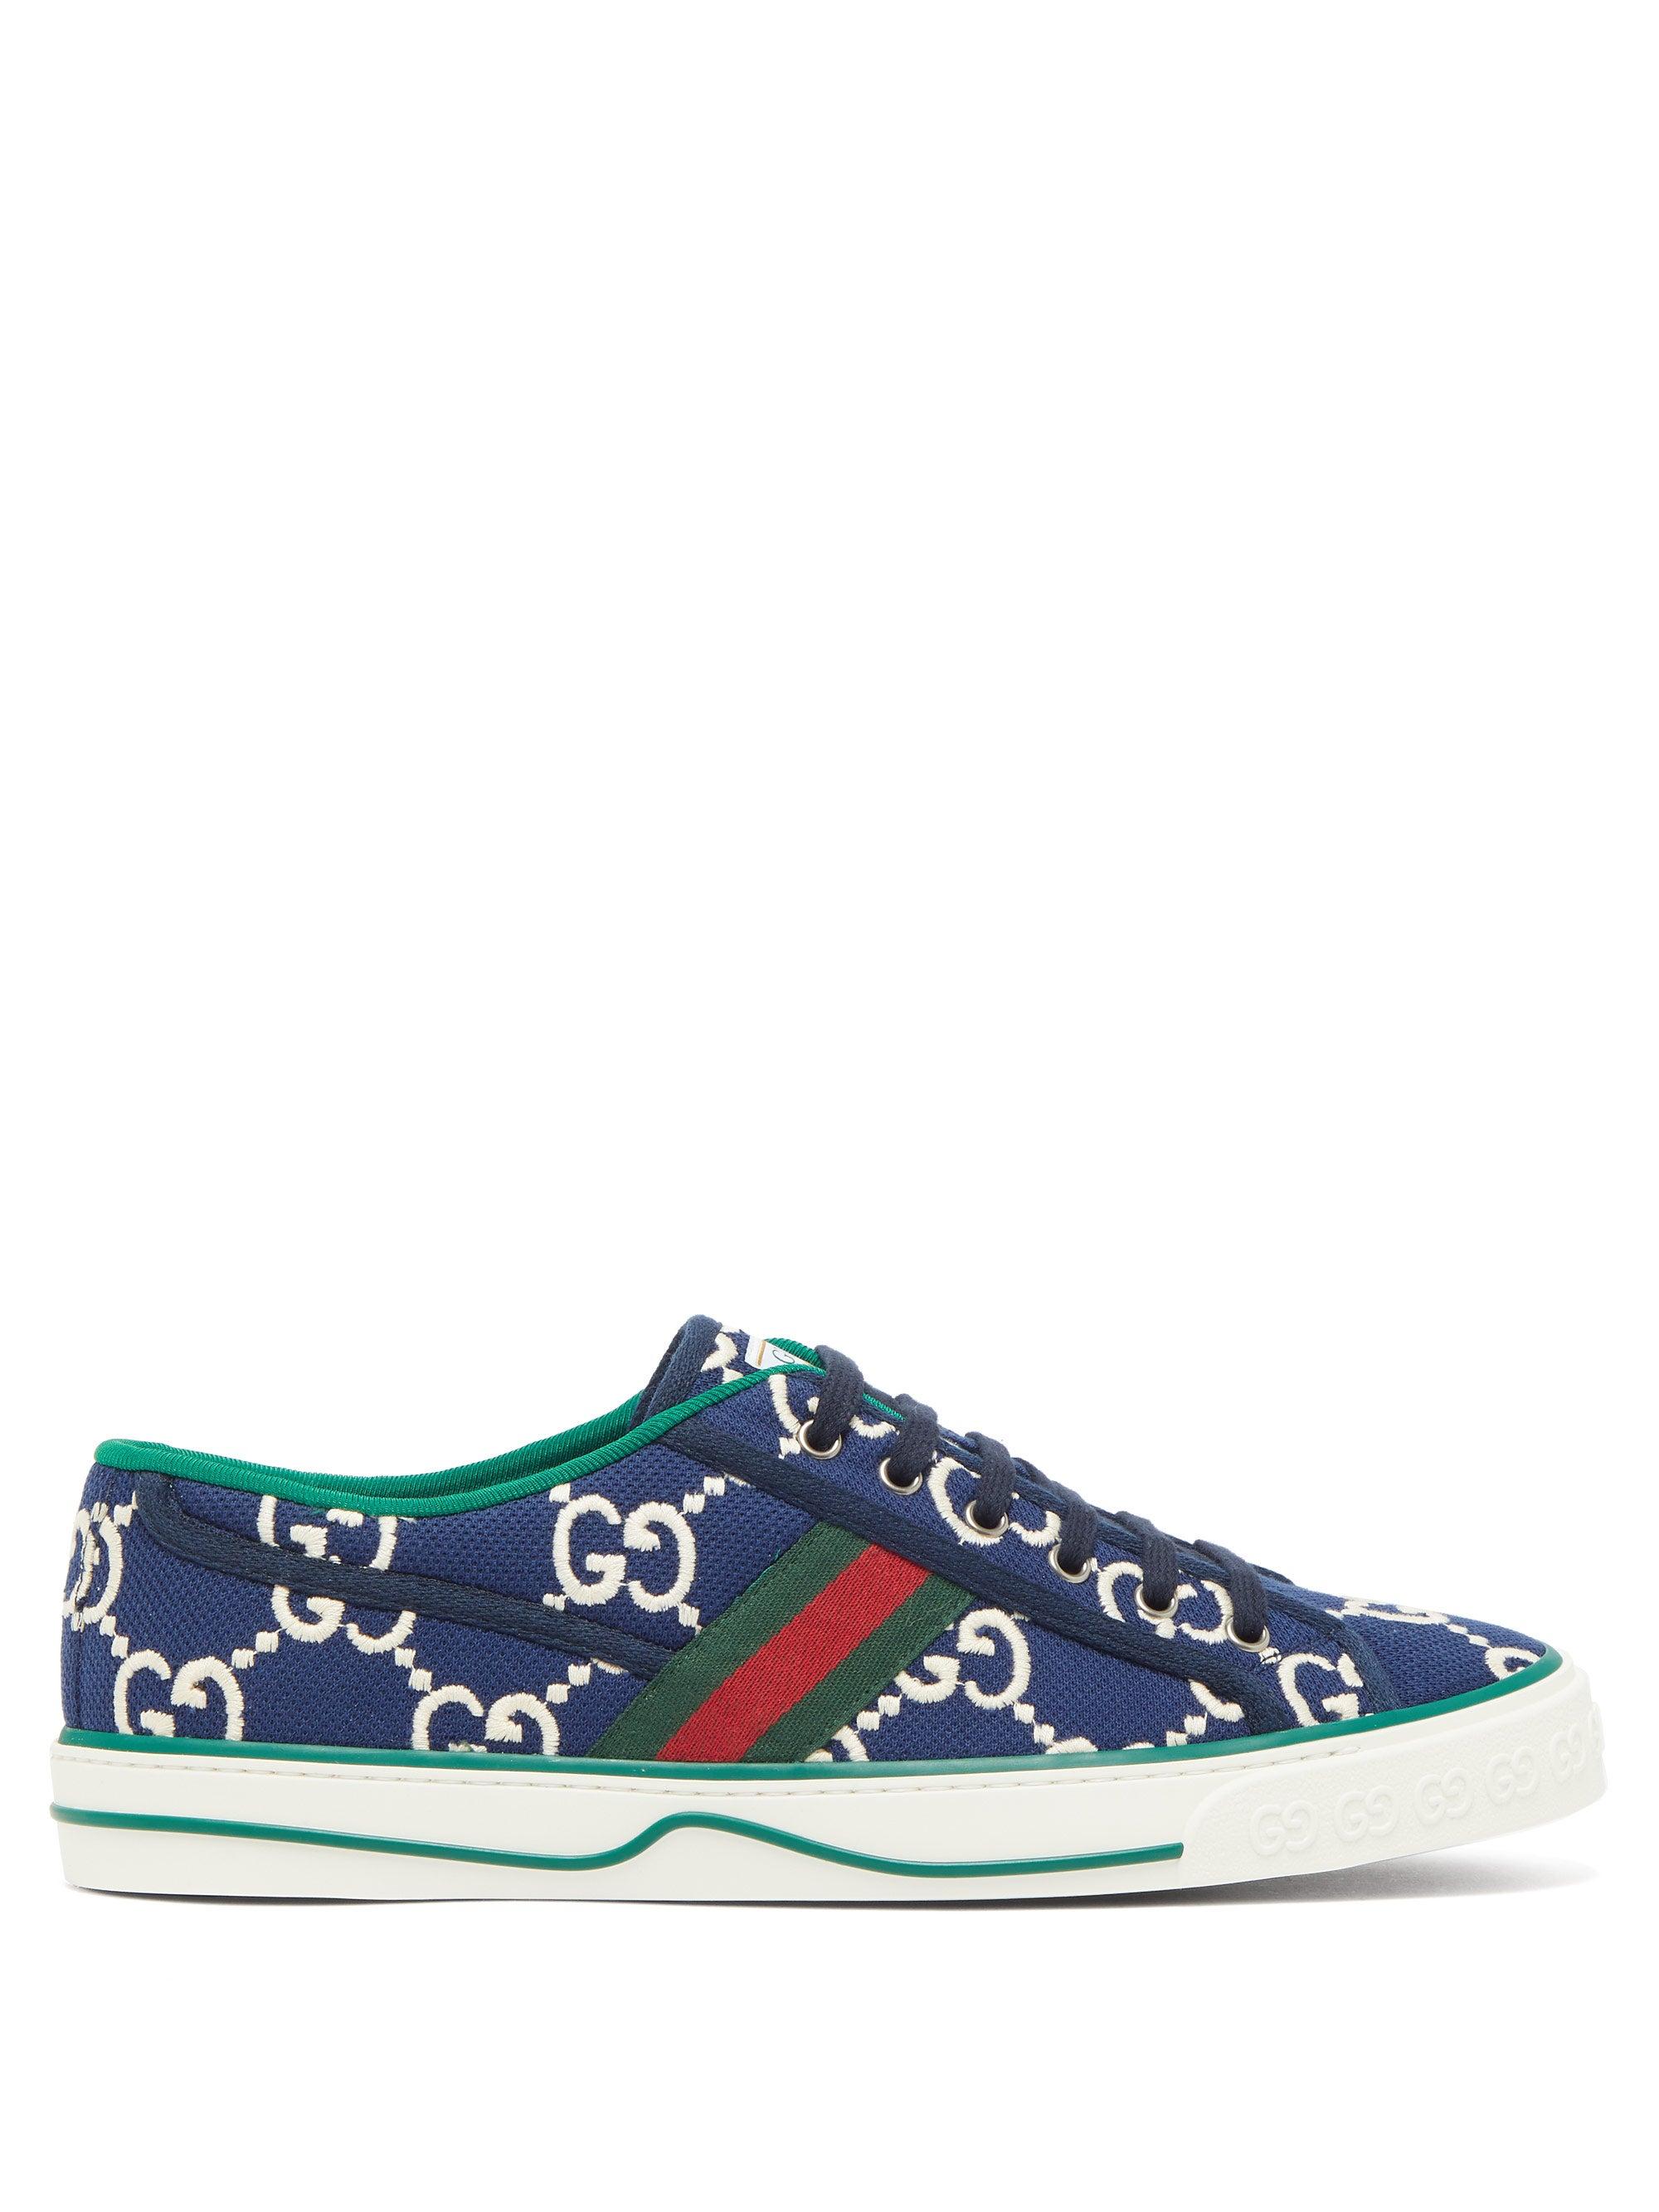 gucci blue trainers